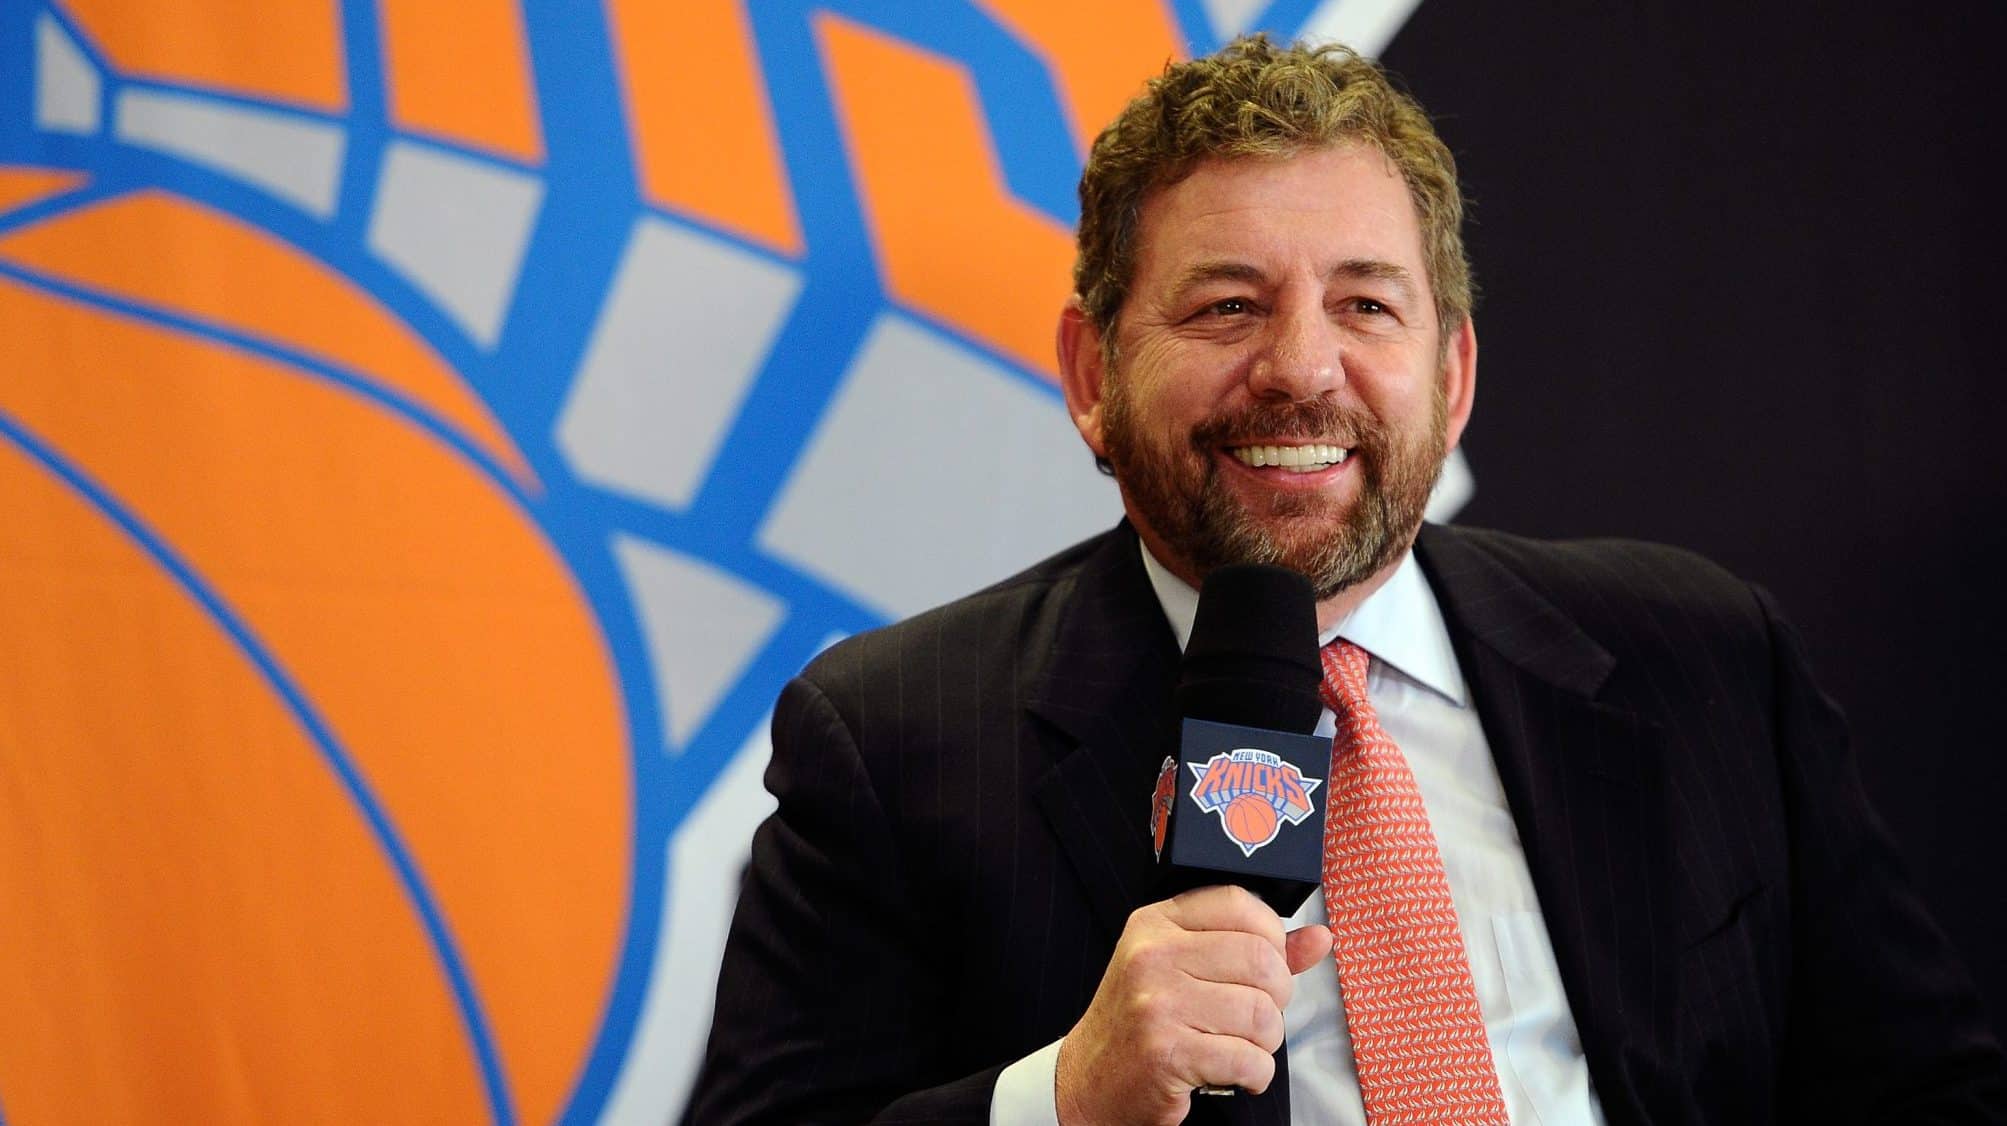 NEW YORK, NY - MARCH 18: James Dolan, Executive Chairman of Madison Square Garden, answers questions during the press conference to introduce Phil Jackson as President of the New York Knicks at Madison Square Garden on March 18, 2014 in New York City.